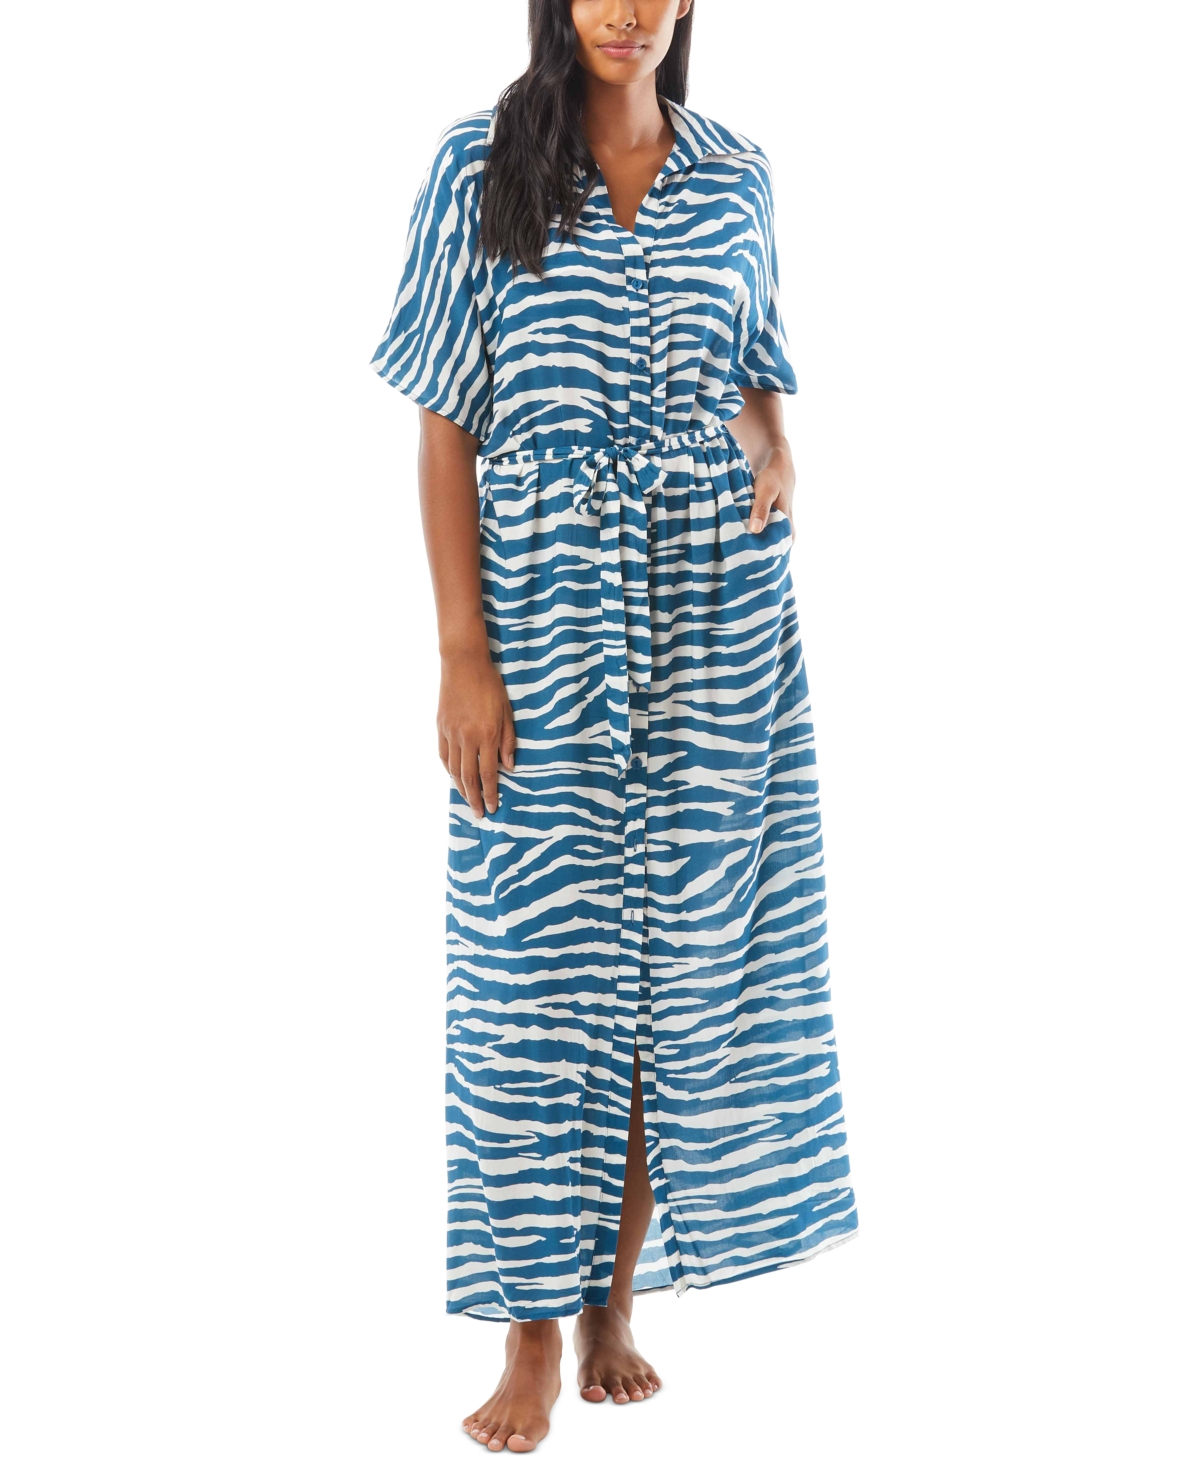 Vince Camuto Belted Maxi Shirt Dress Cover-Up Women's Swimsuit